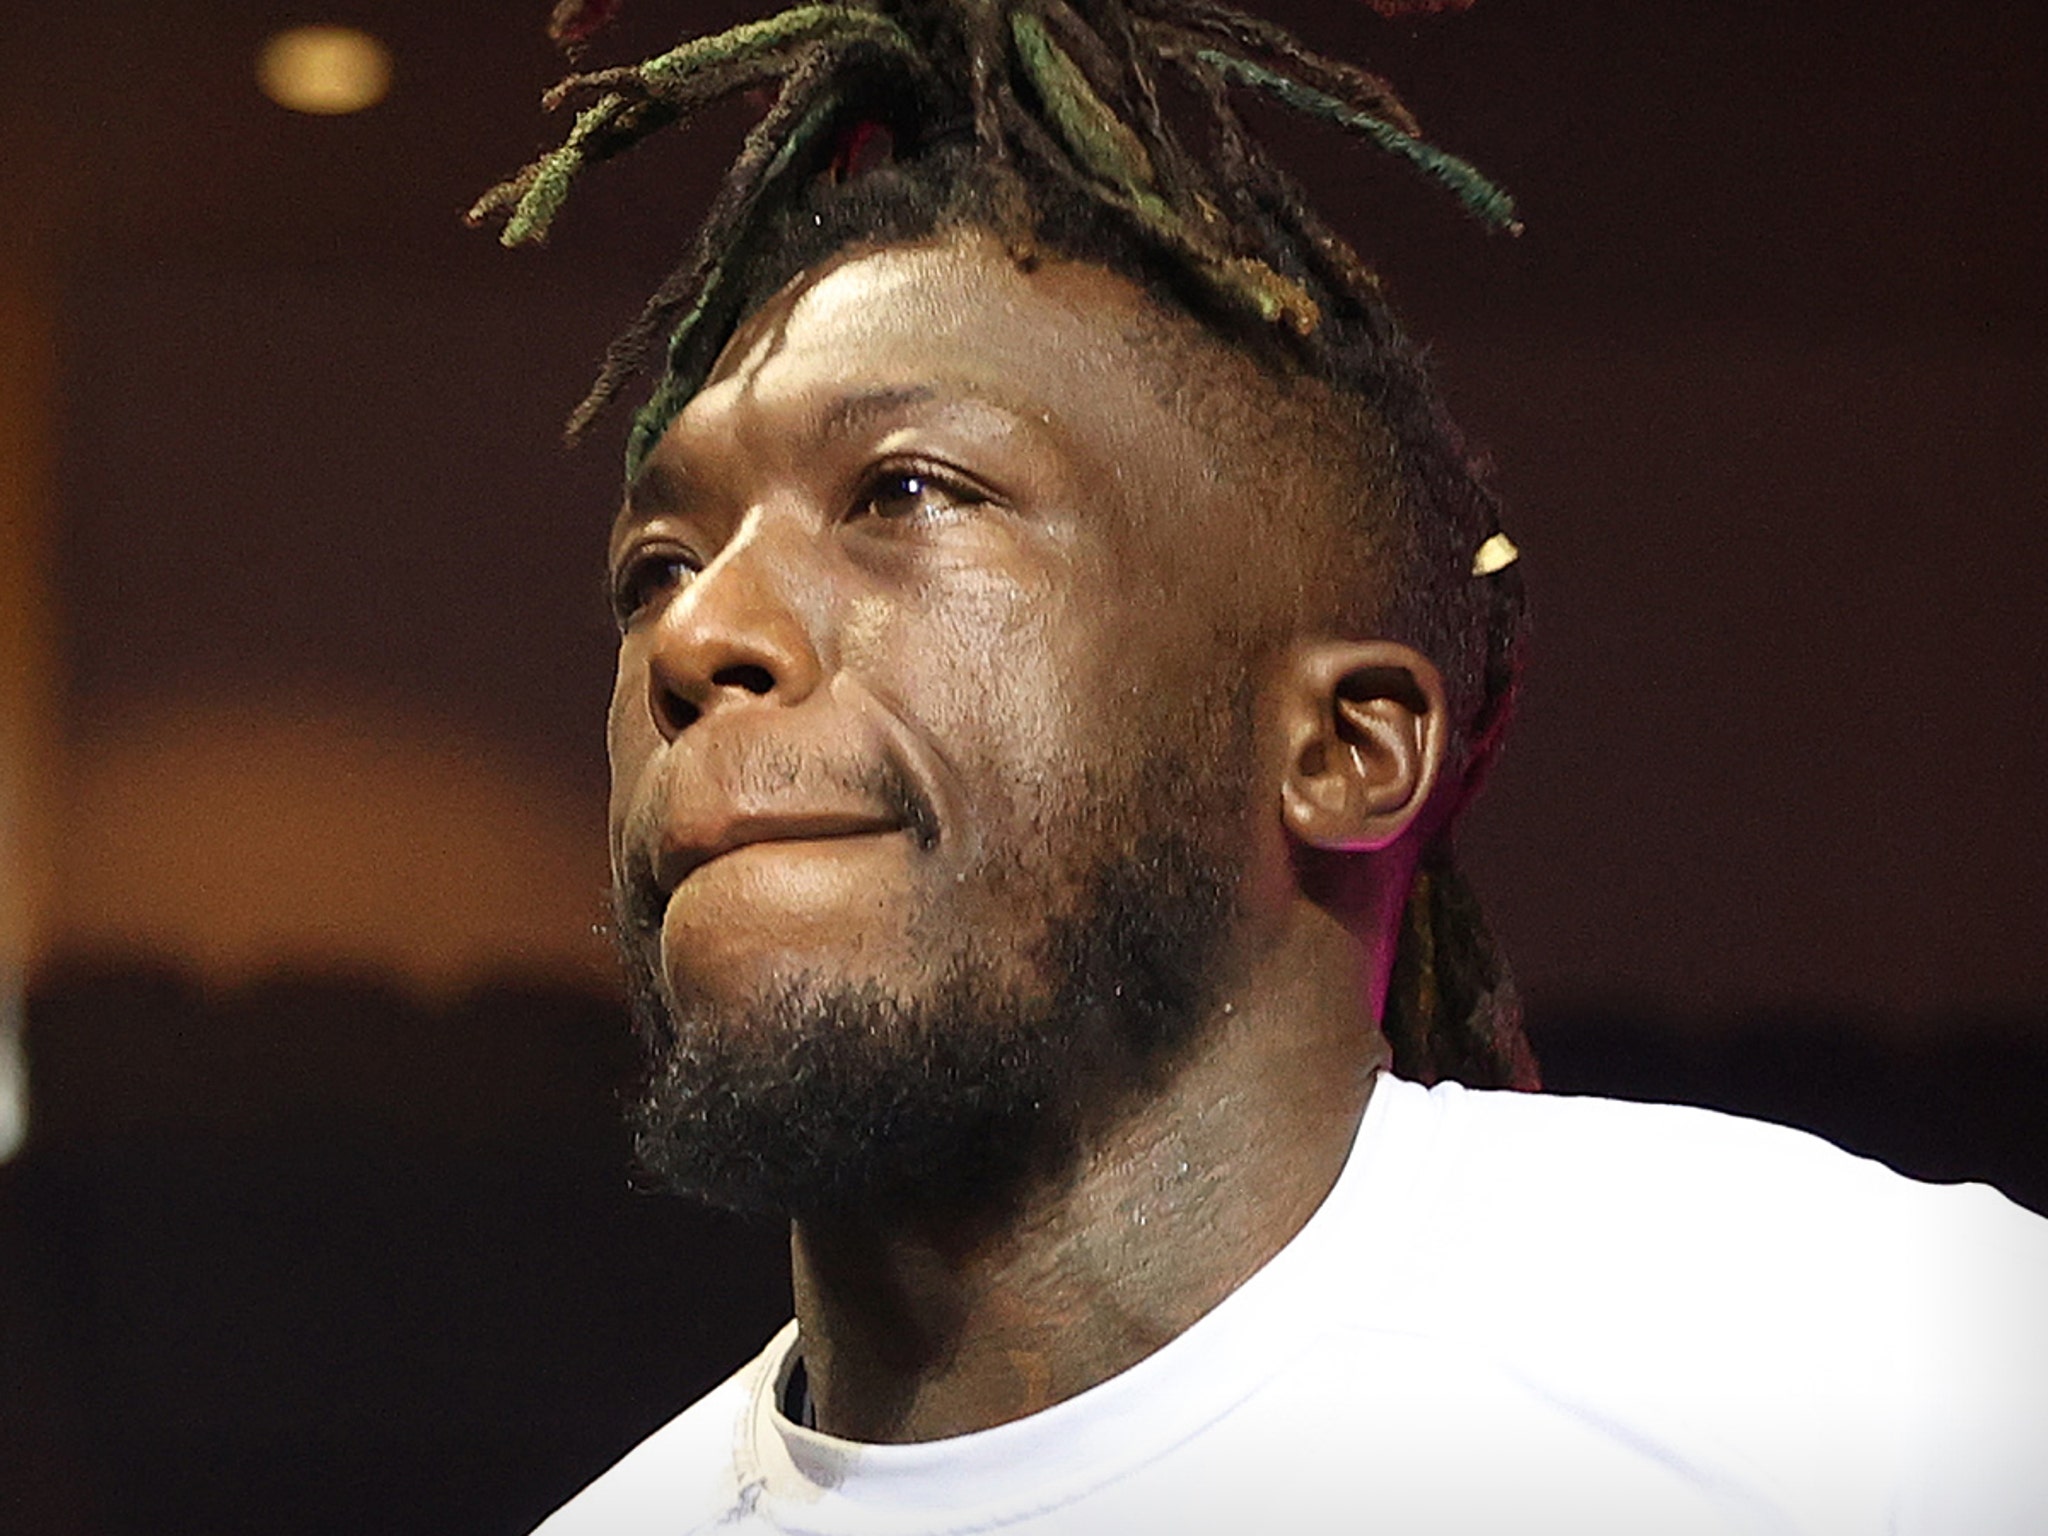 KFC on X: Nate Robinson made $24,000,000 in his career and was an NBA Slam  Dunk Contest Champ. Now he's just a knockout meme synonymous with failure  and embarrassment. @ATIBarstool question of